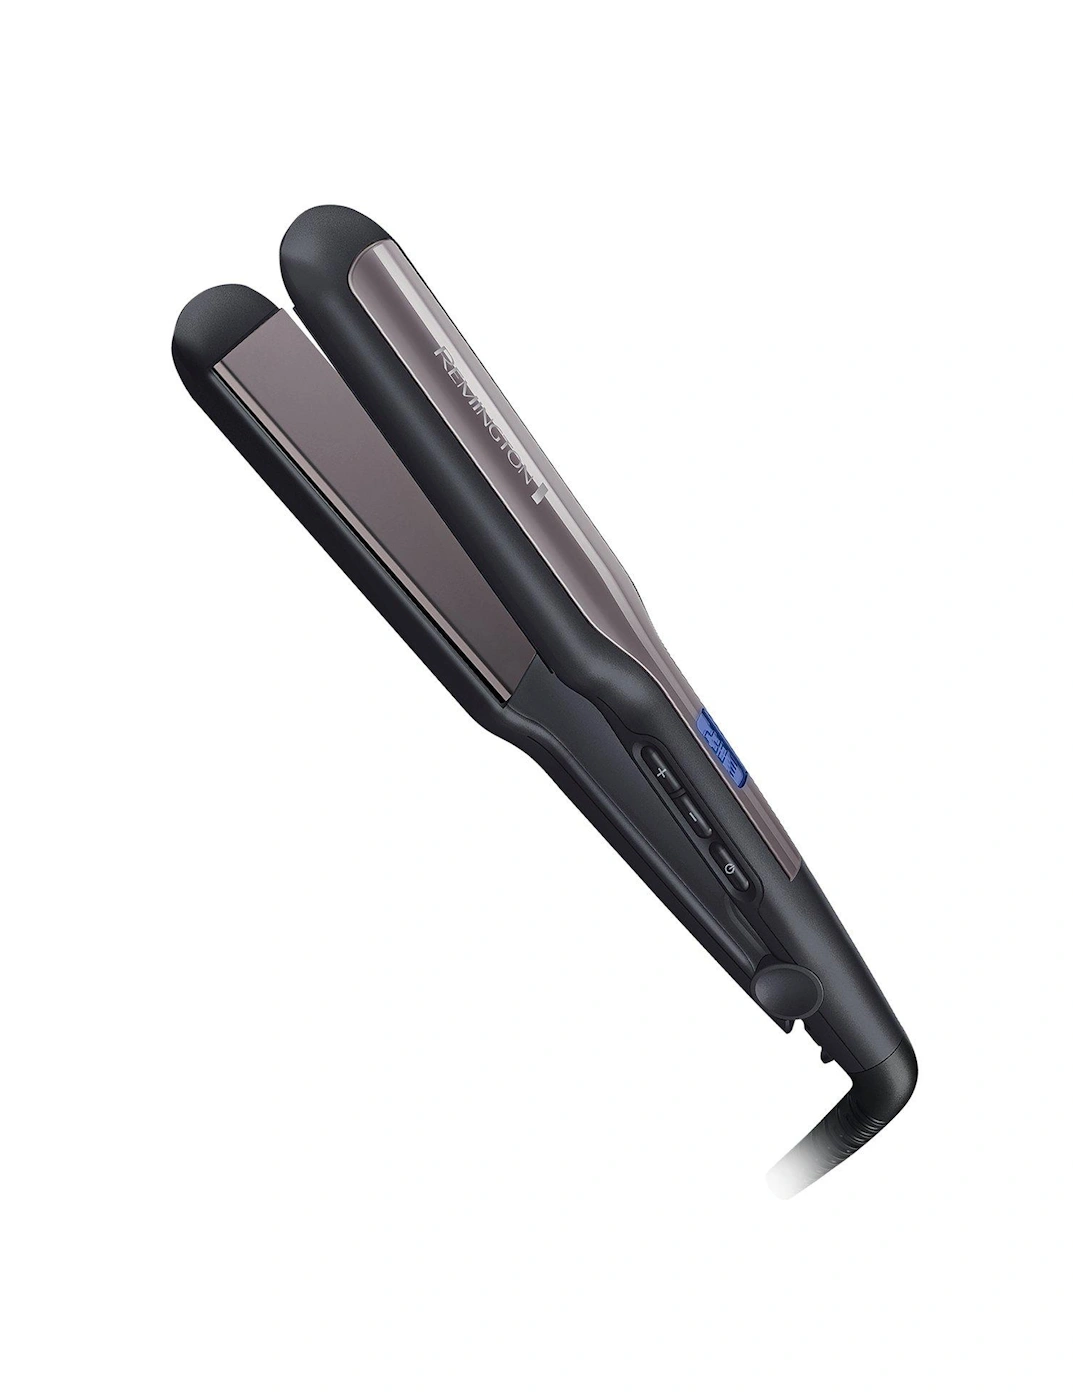 Pro-Ceramic Extra Wide Plate Hair Straightener - S5525, 3 of 2